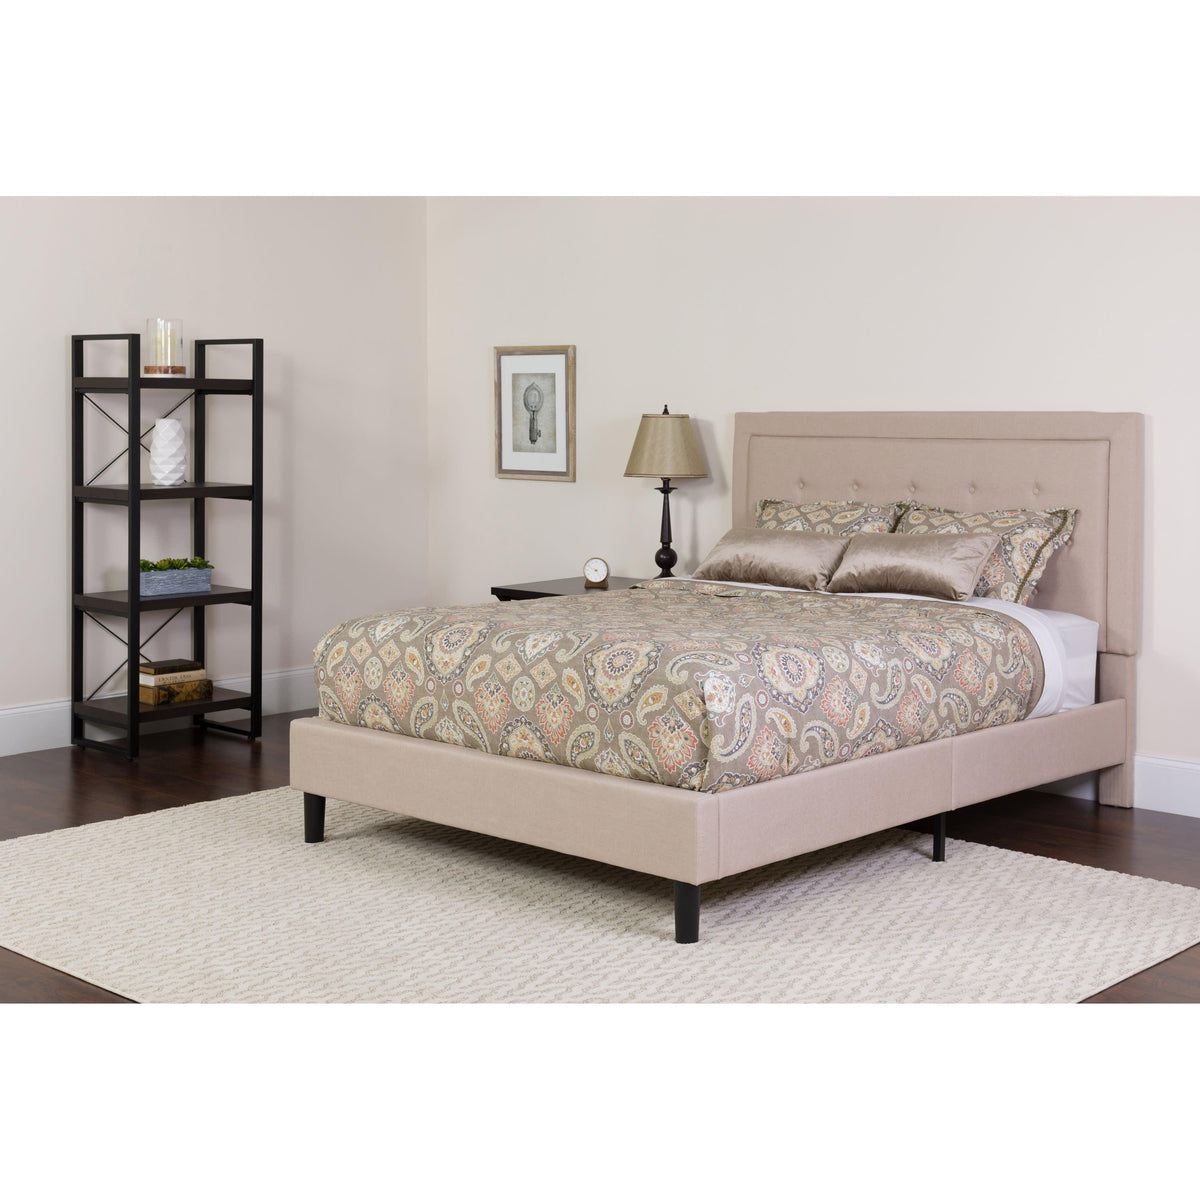 Beige,Twin |#| Twin Size Panel Tufted Beige Fabric Platform Bed with Pocket Spring Mattress